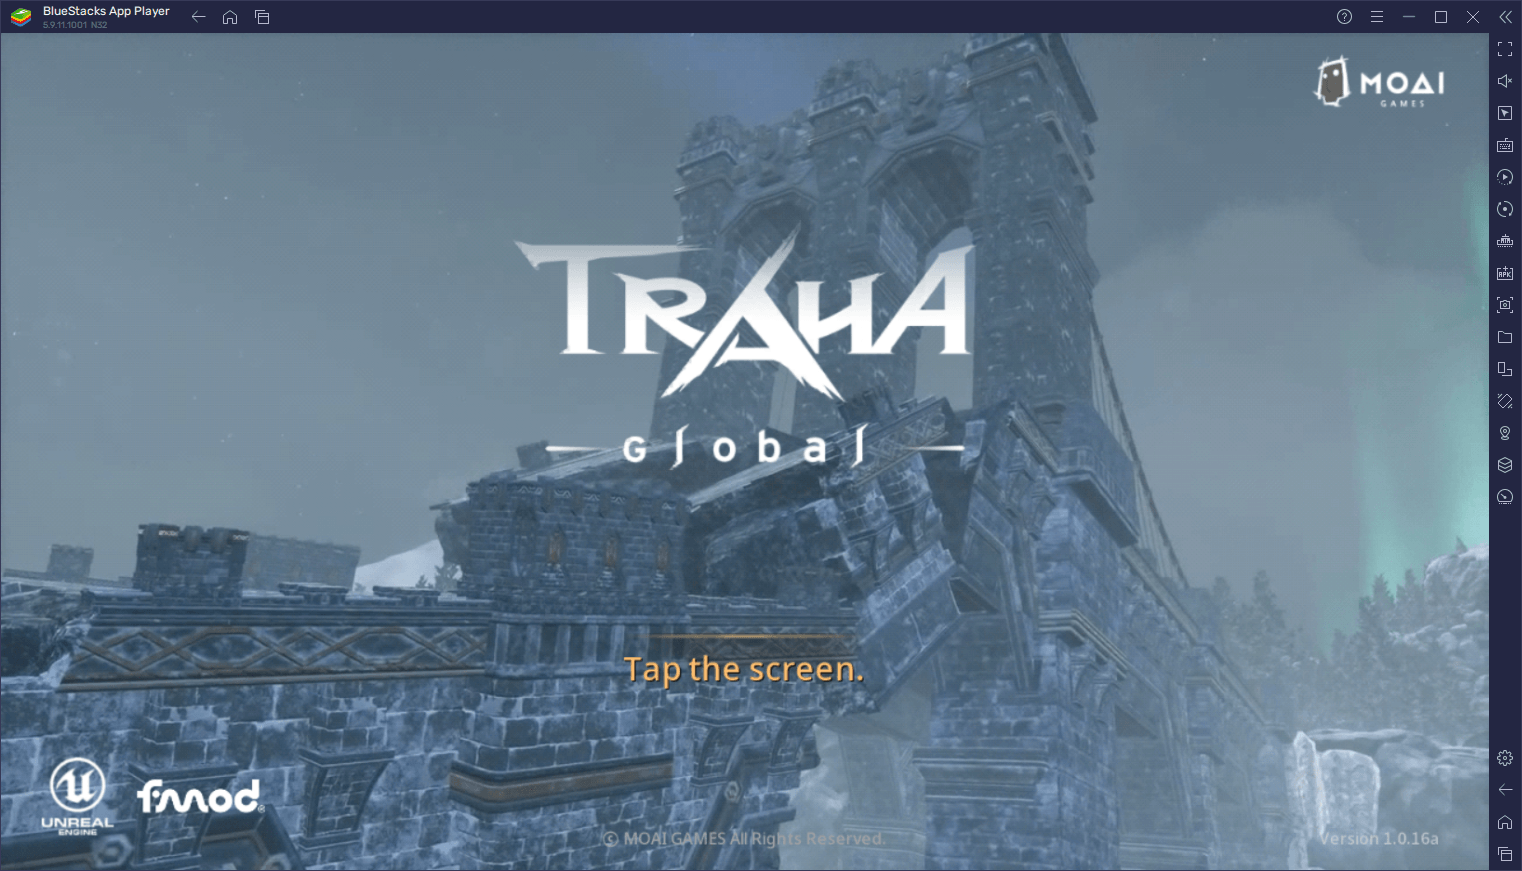 Beginner Tips and Tricks for TRAHA Global - Start Your Journey on the Right Track